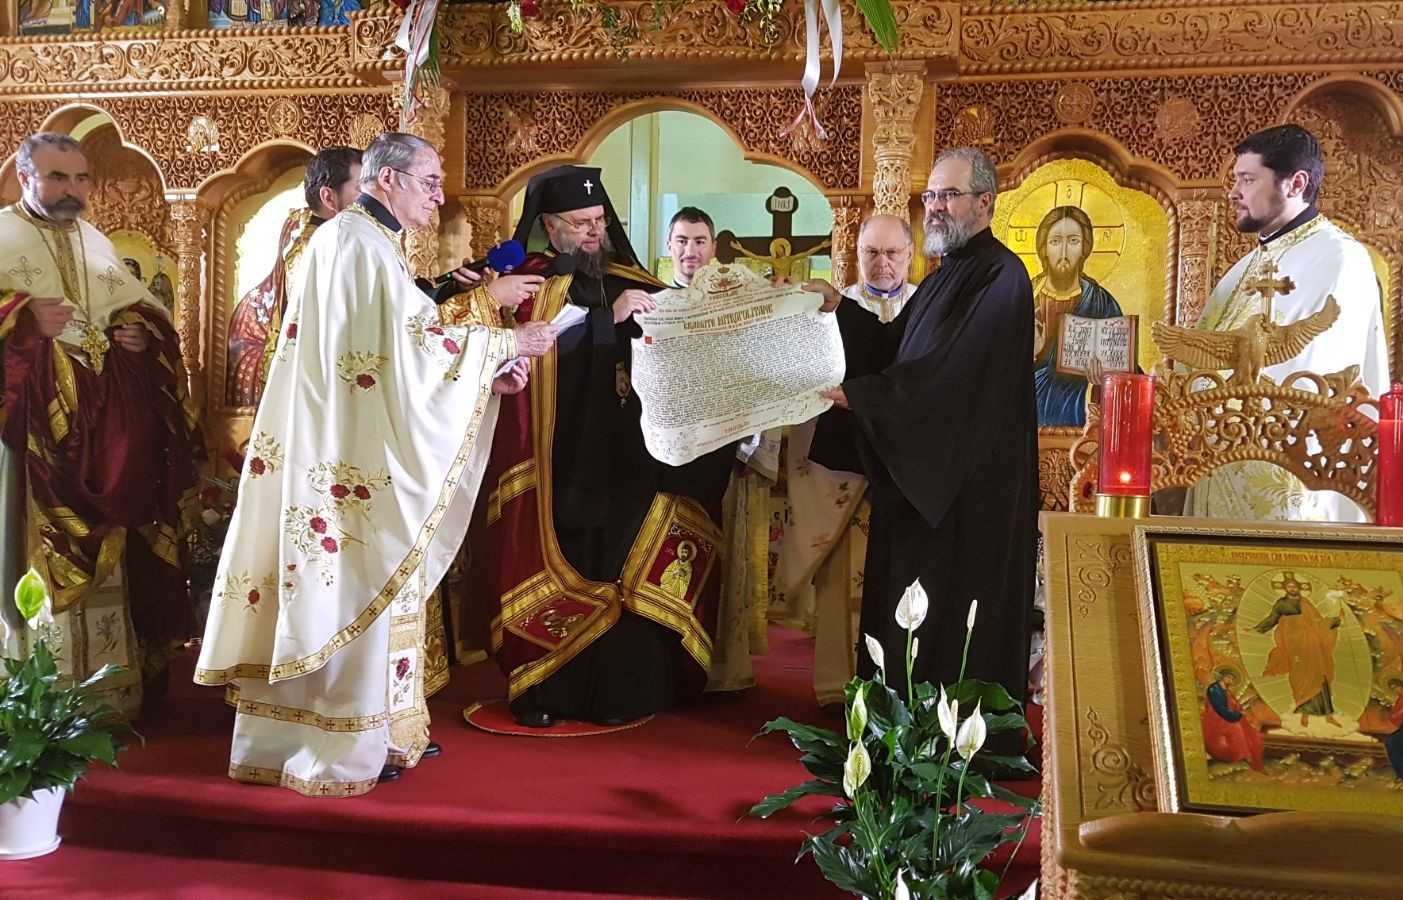 Enthronement Ceremony - His Grace Ioan Casian enthroned as Romanian Orthodox Bishop of Canada